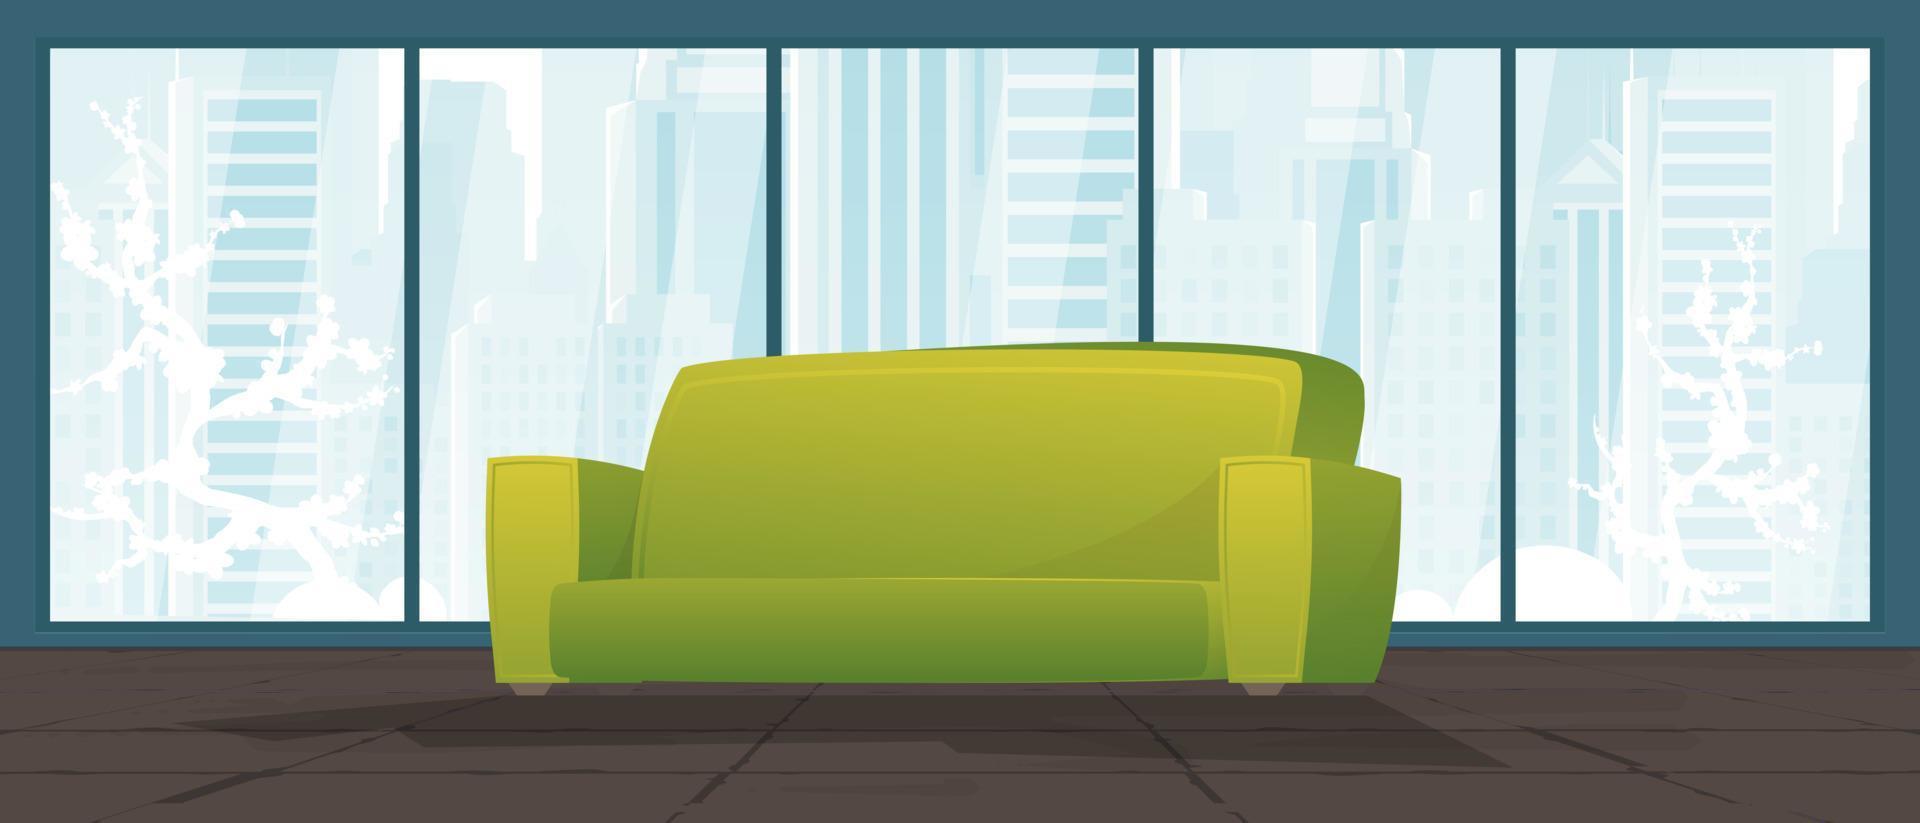 A room with upholstered furniture and a large panoramic window. Cute illustration in flat style. vector